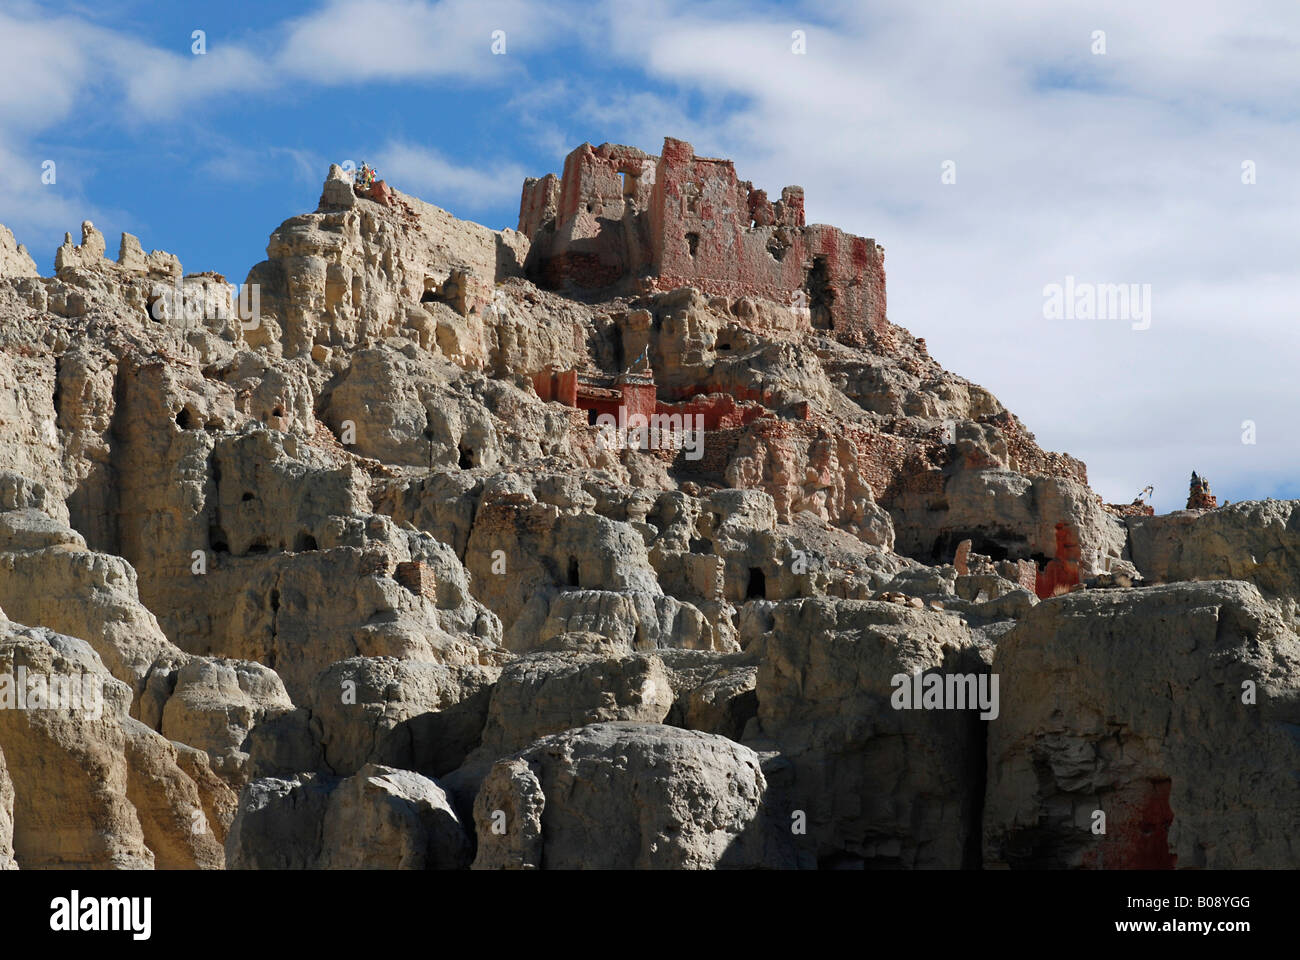 Monastery atop rock formations, Dungkar Caves in the ancient kingdom of Guge, Ngari Province, Western Tibet, China Stock Photo